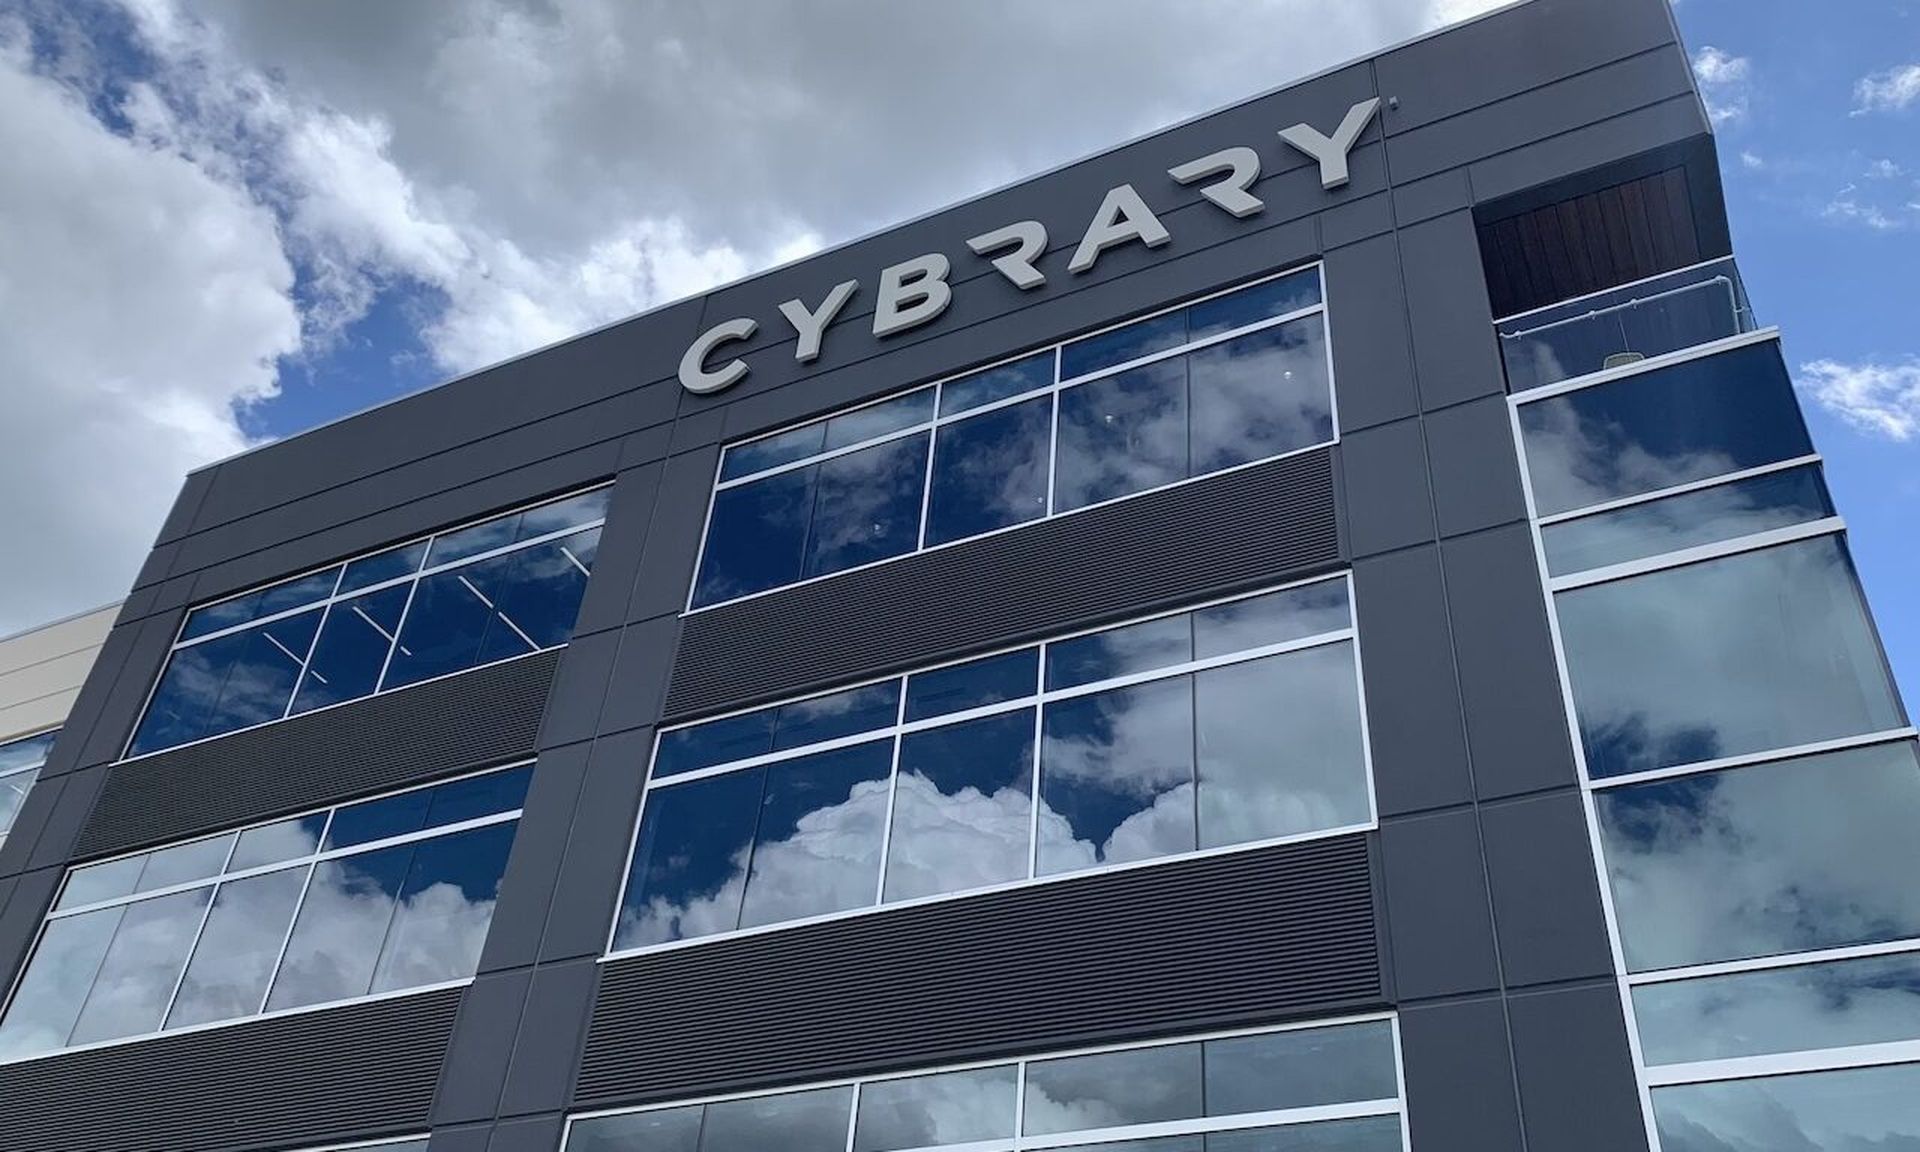 The Cybrary headquarters in College Park, Maryland. (Cybrary)